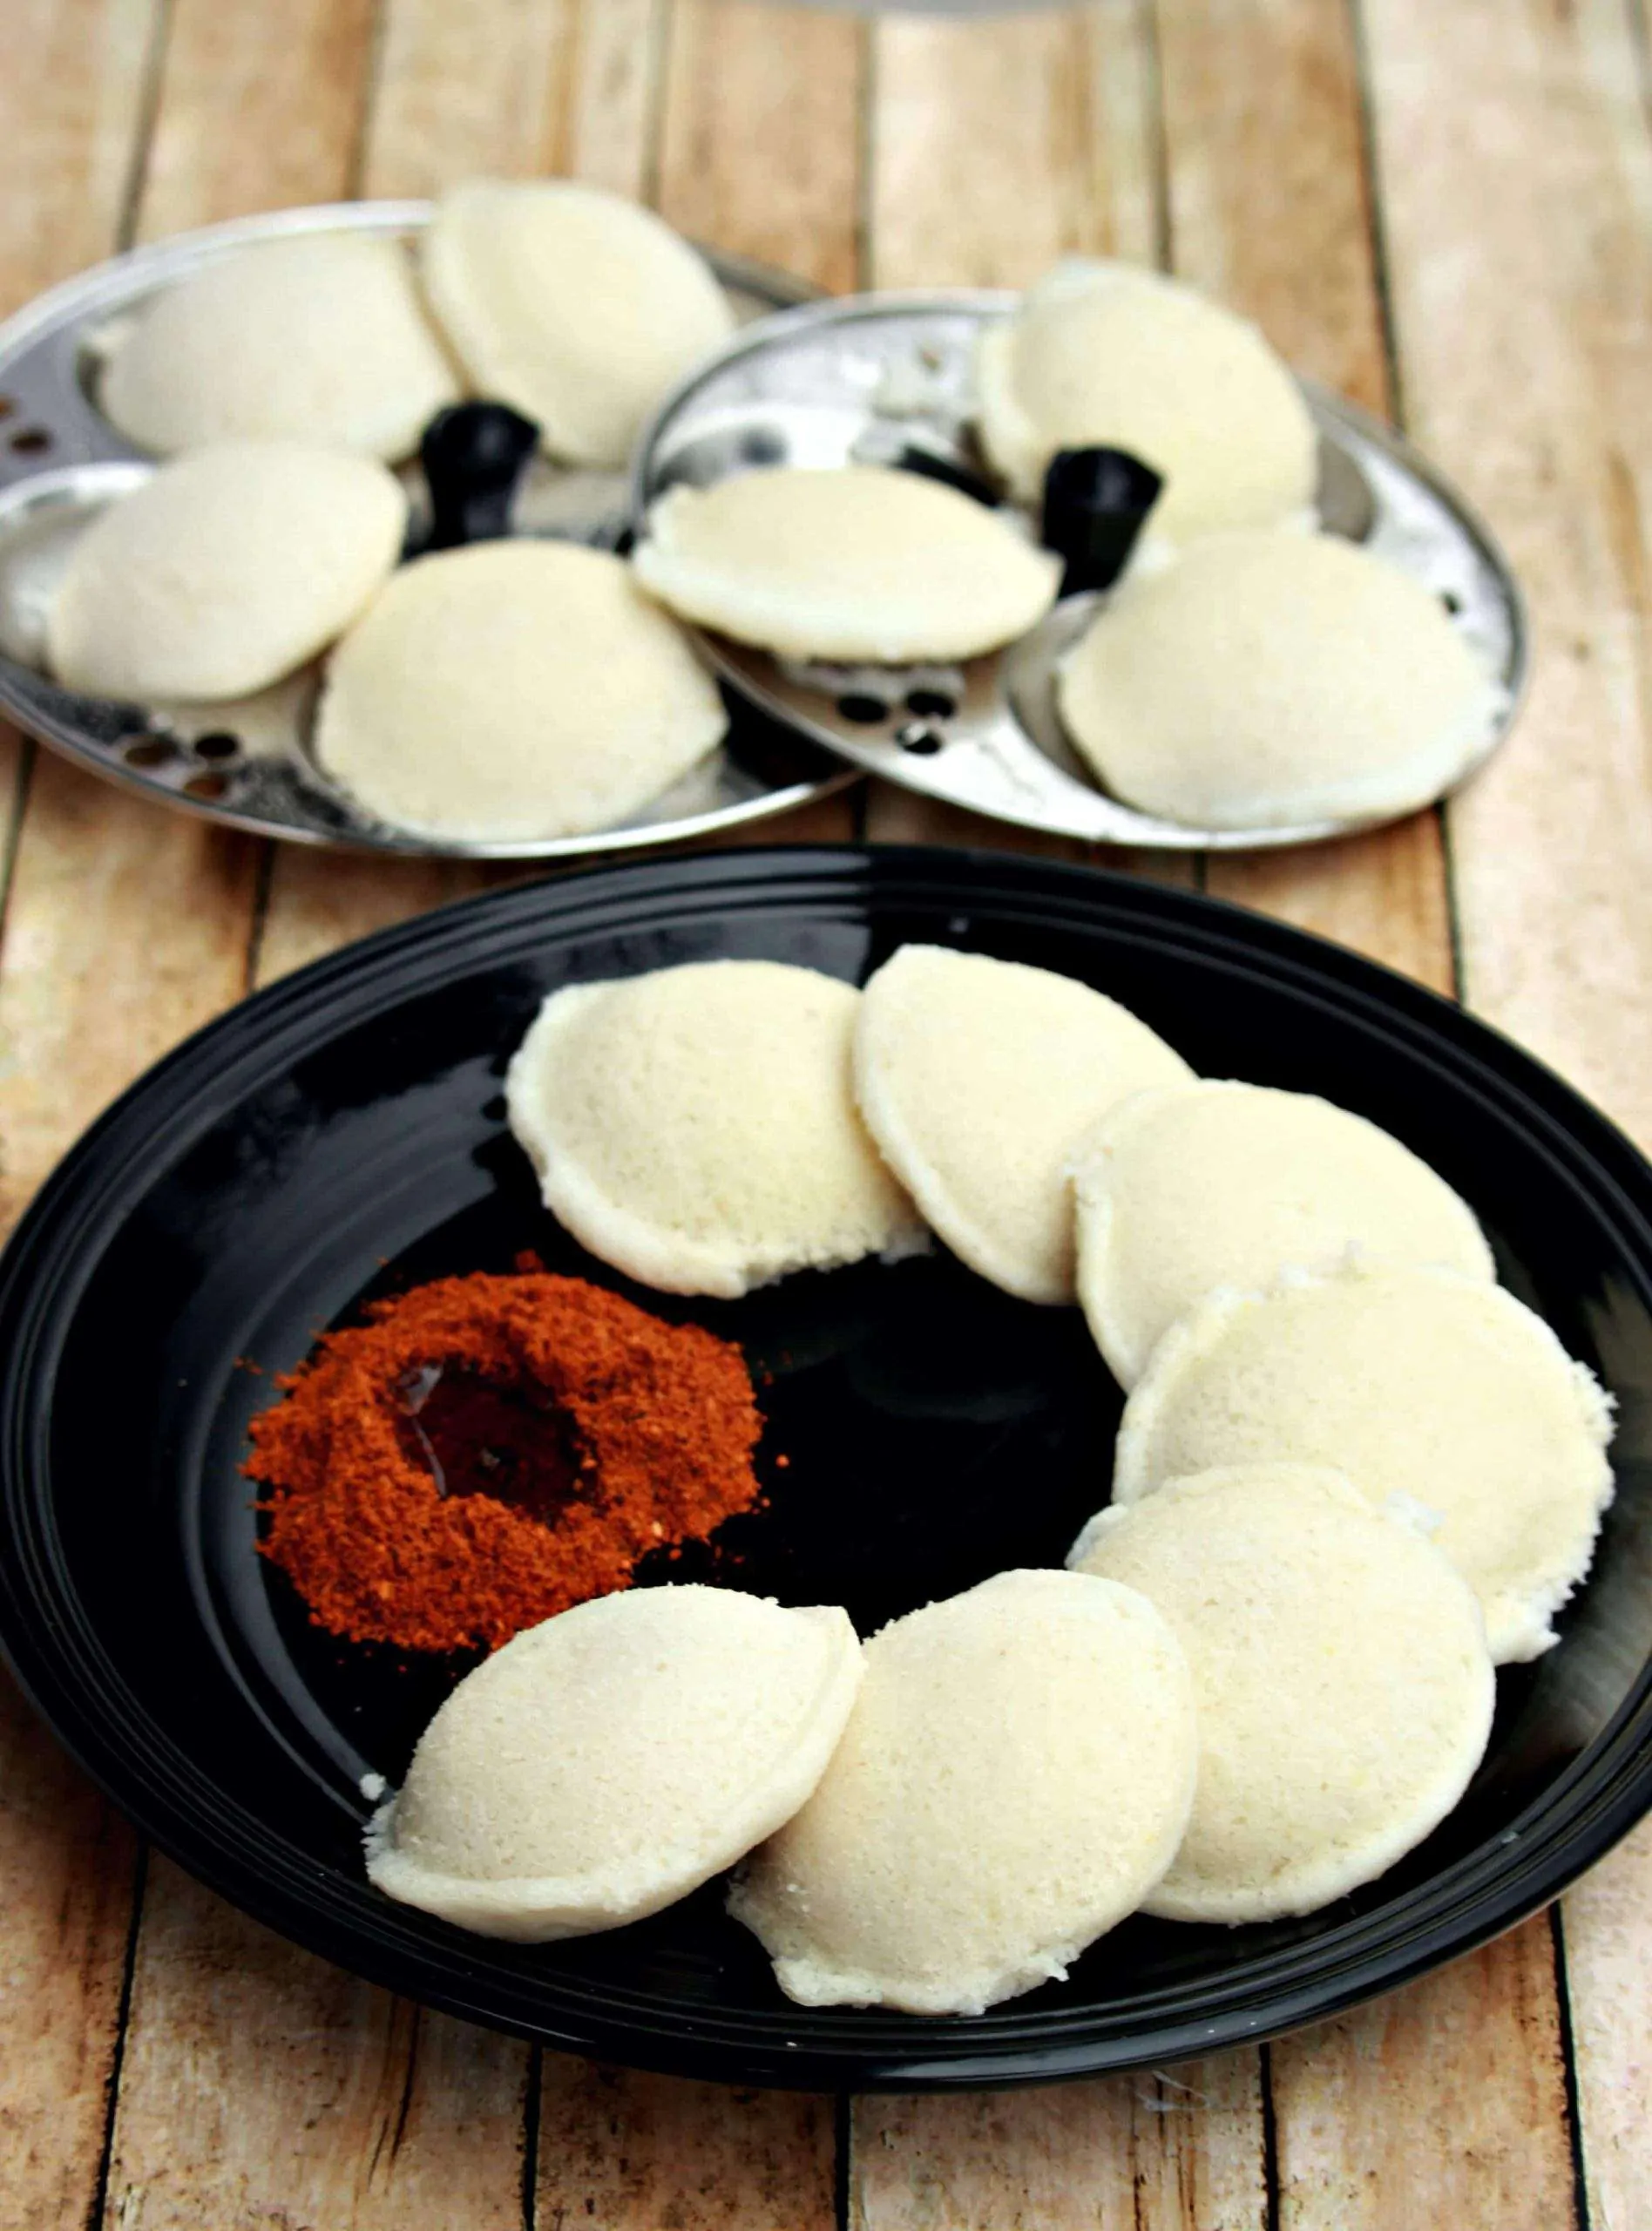 Steamed Idli served with sauce.